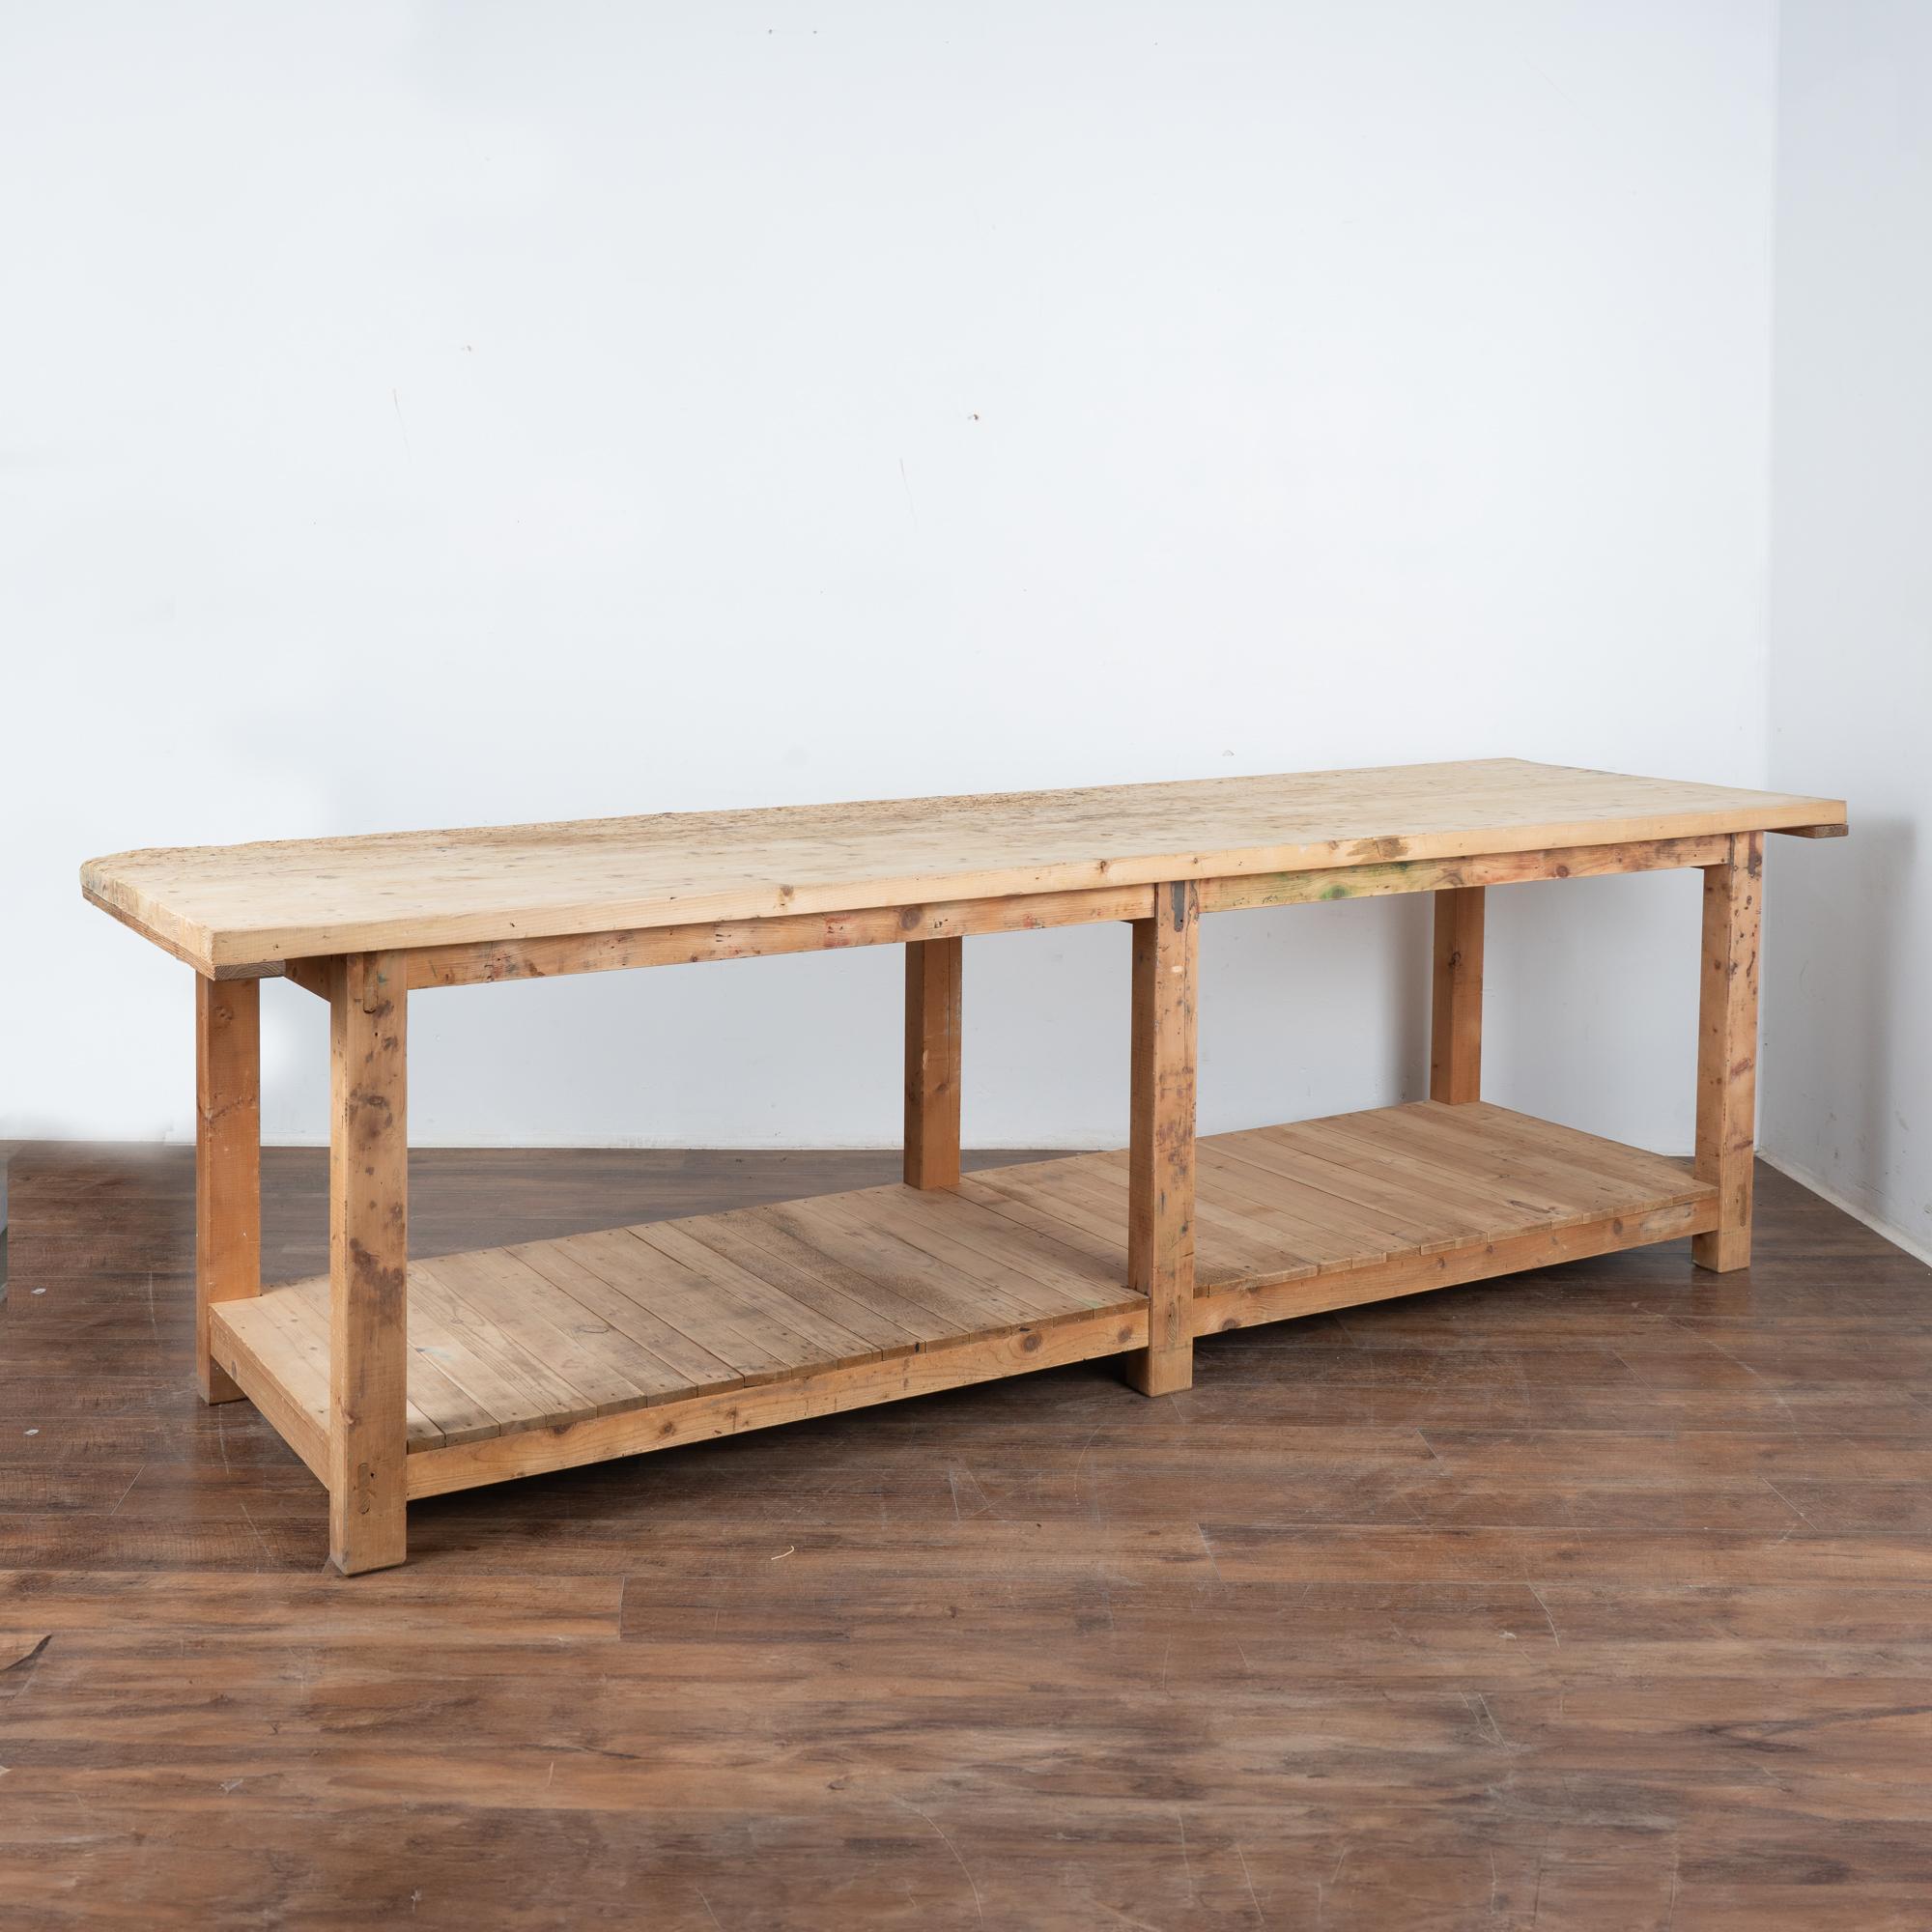 This rustic work table is over 10' long with lower shelf and six legs.
This heavily used table reflects generations of use in every gouge, nick, scratch, hole, dried worm hole, stain and crack. Residual green paint is also seen in this rugged table.